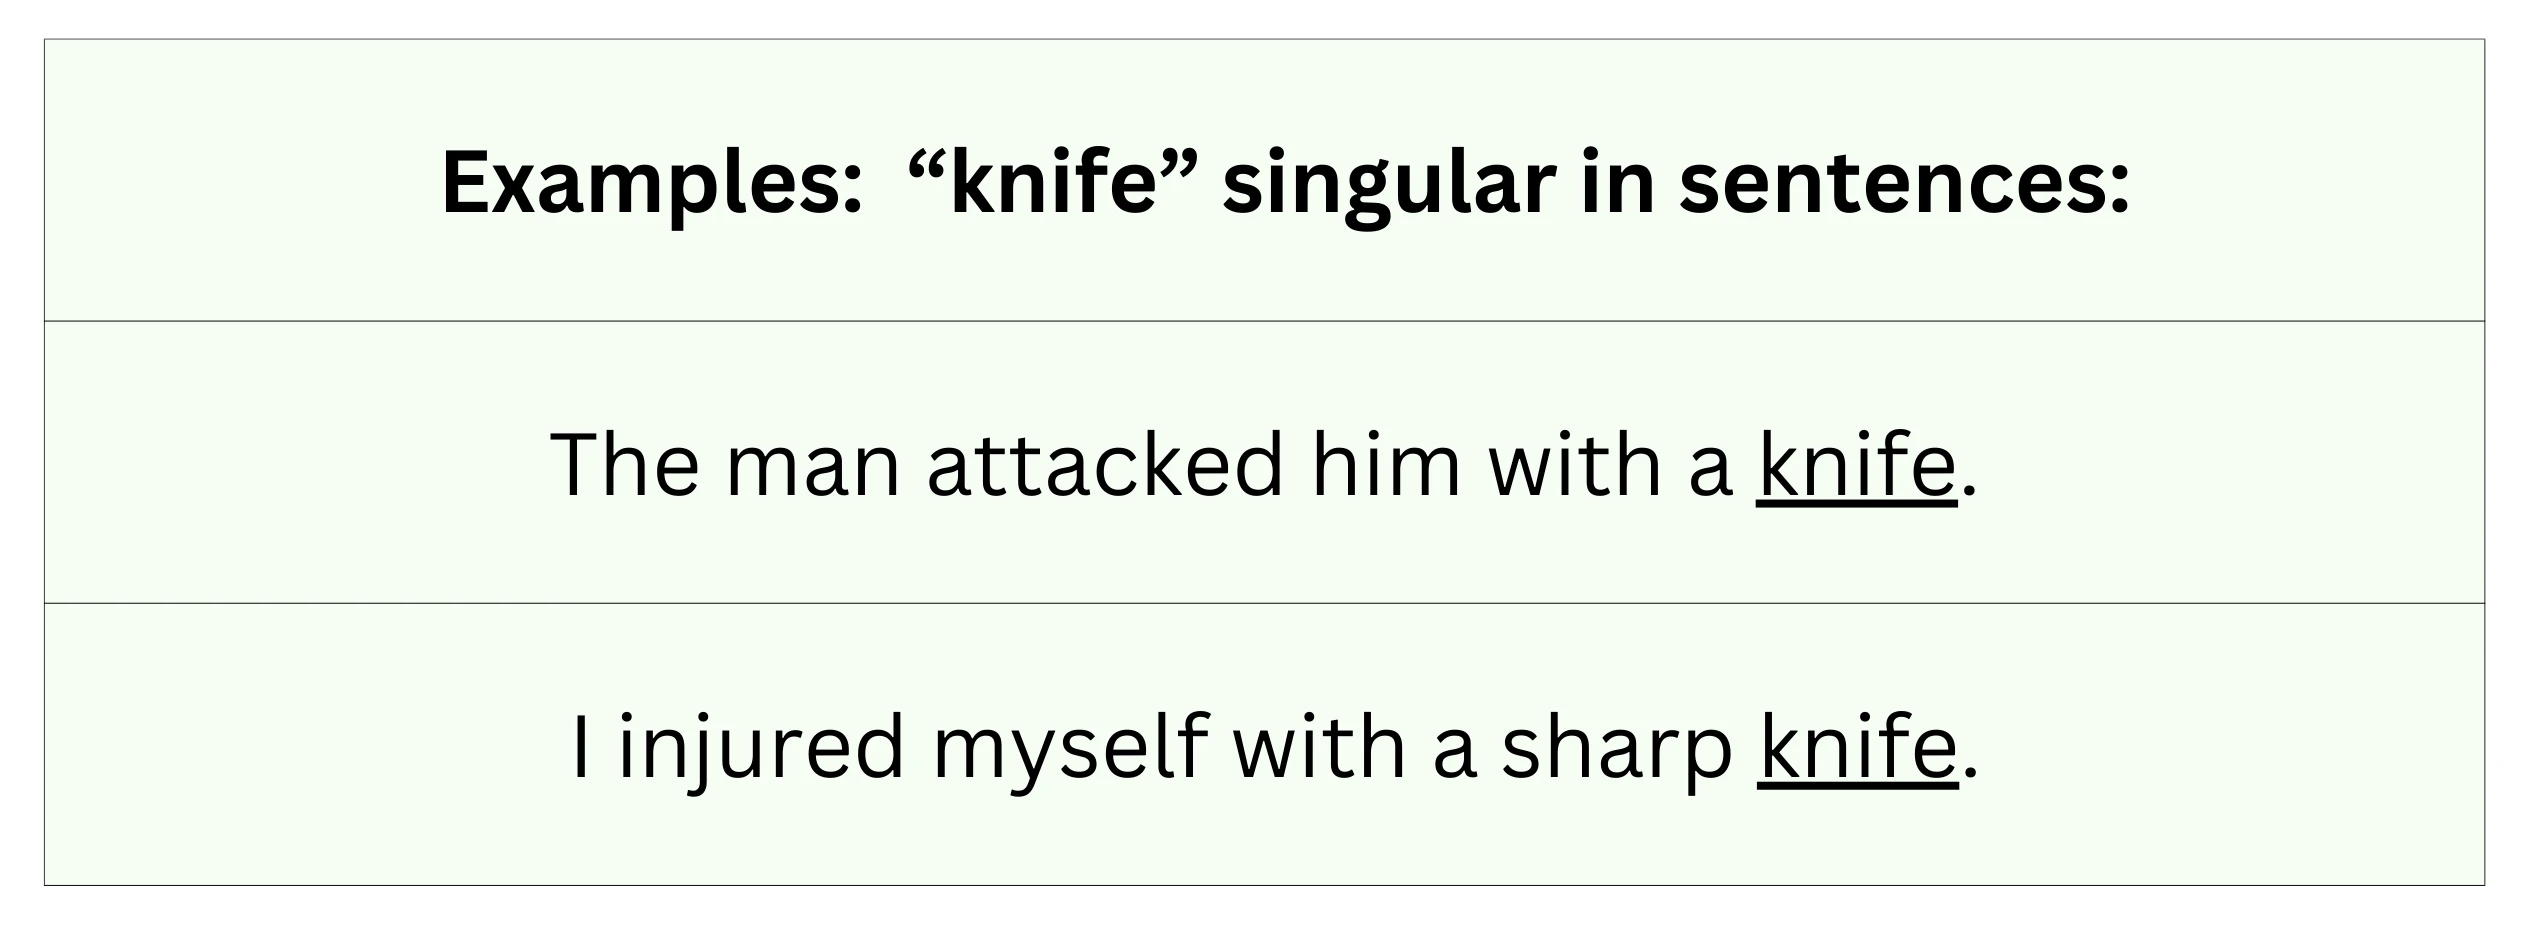 "Knife" in sentence examples.